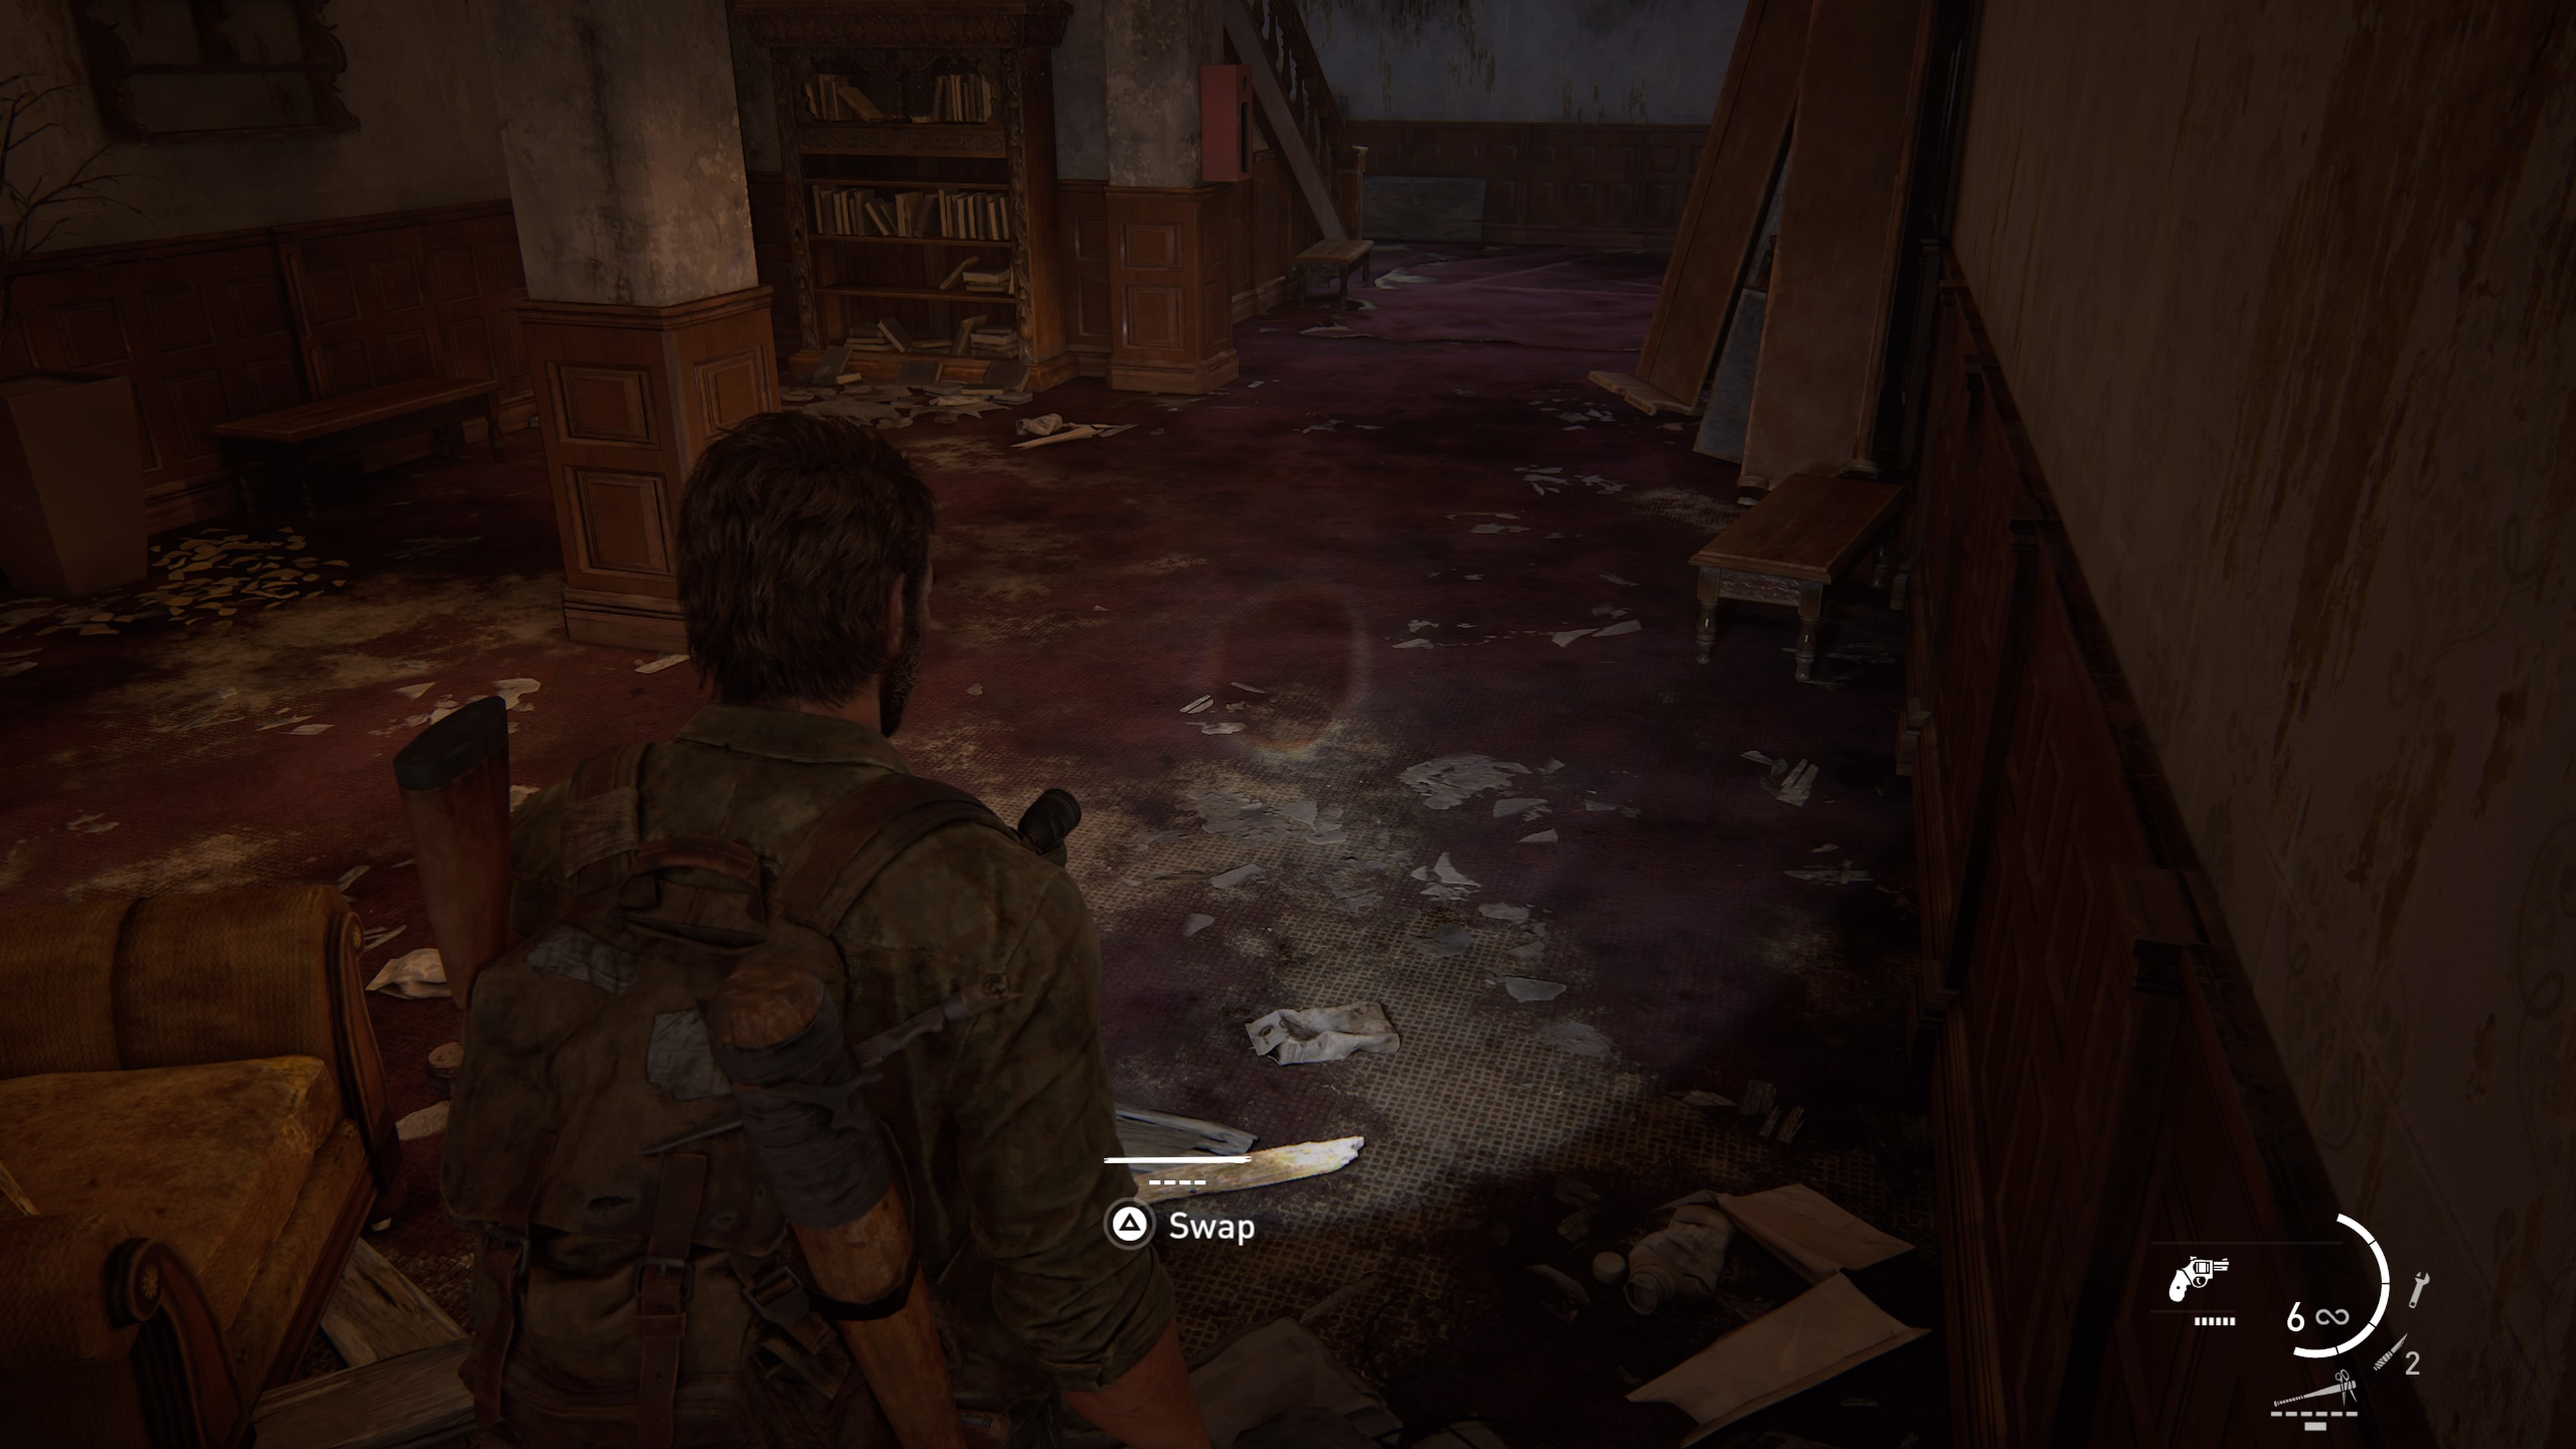 The Last Of Us Part 1: Combat Ready trophy guide 